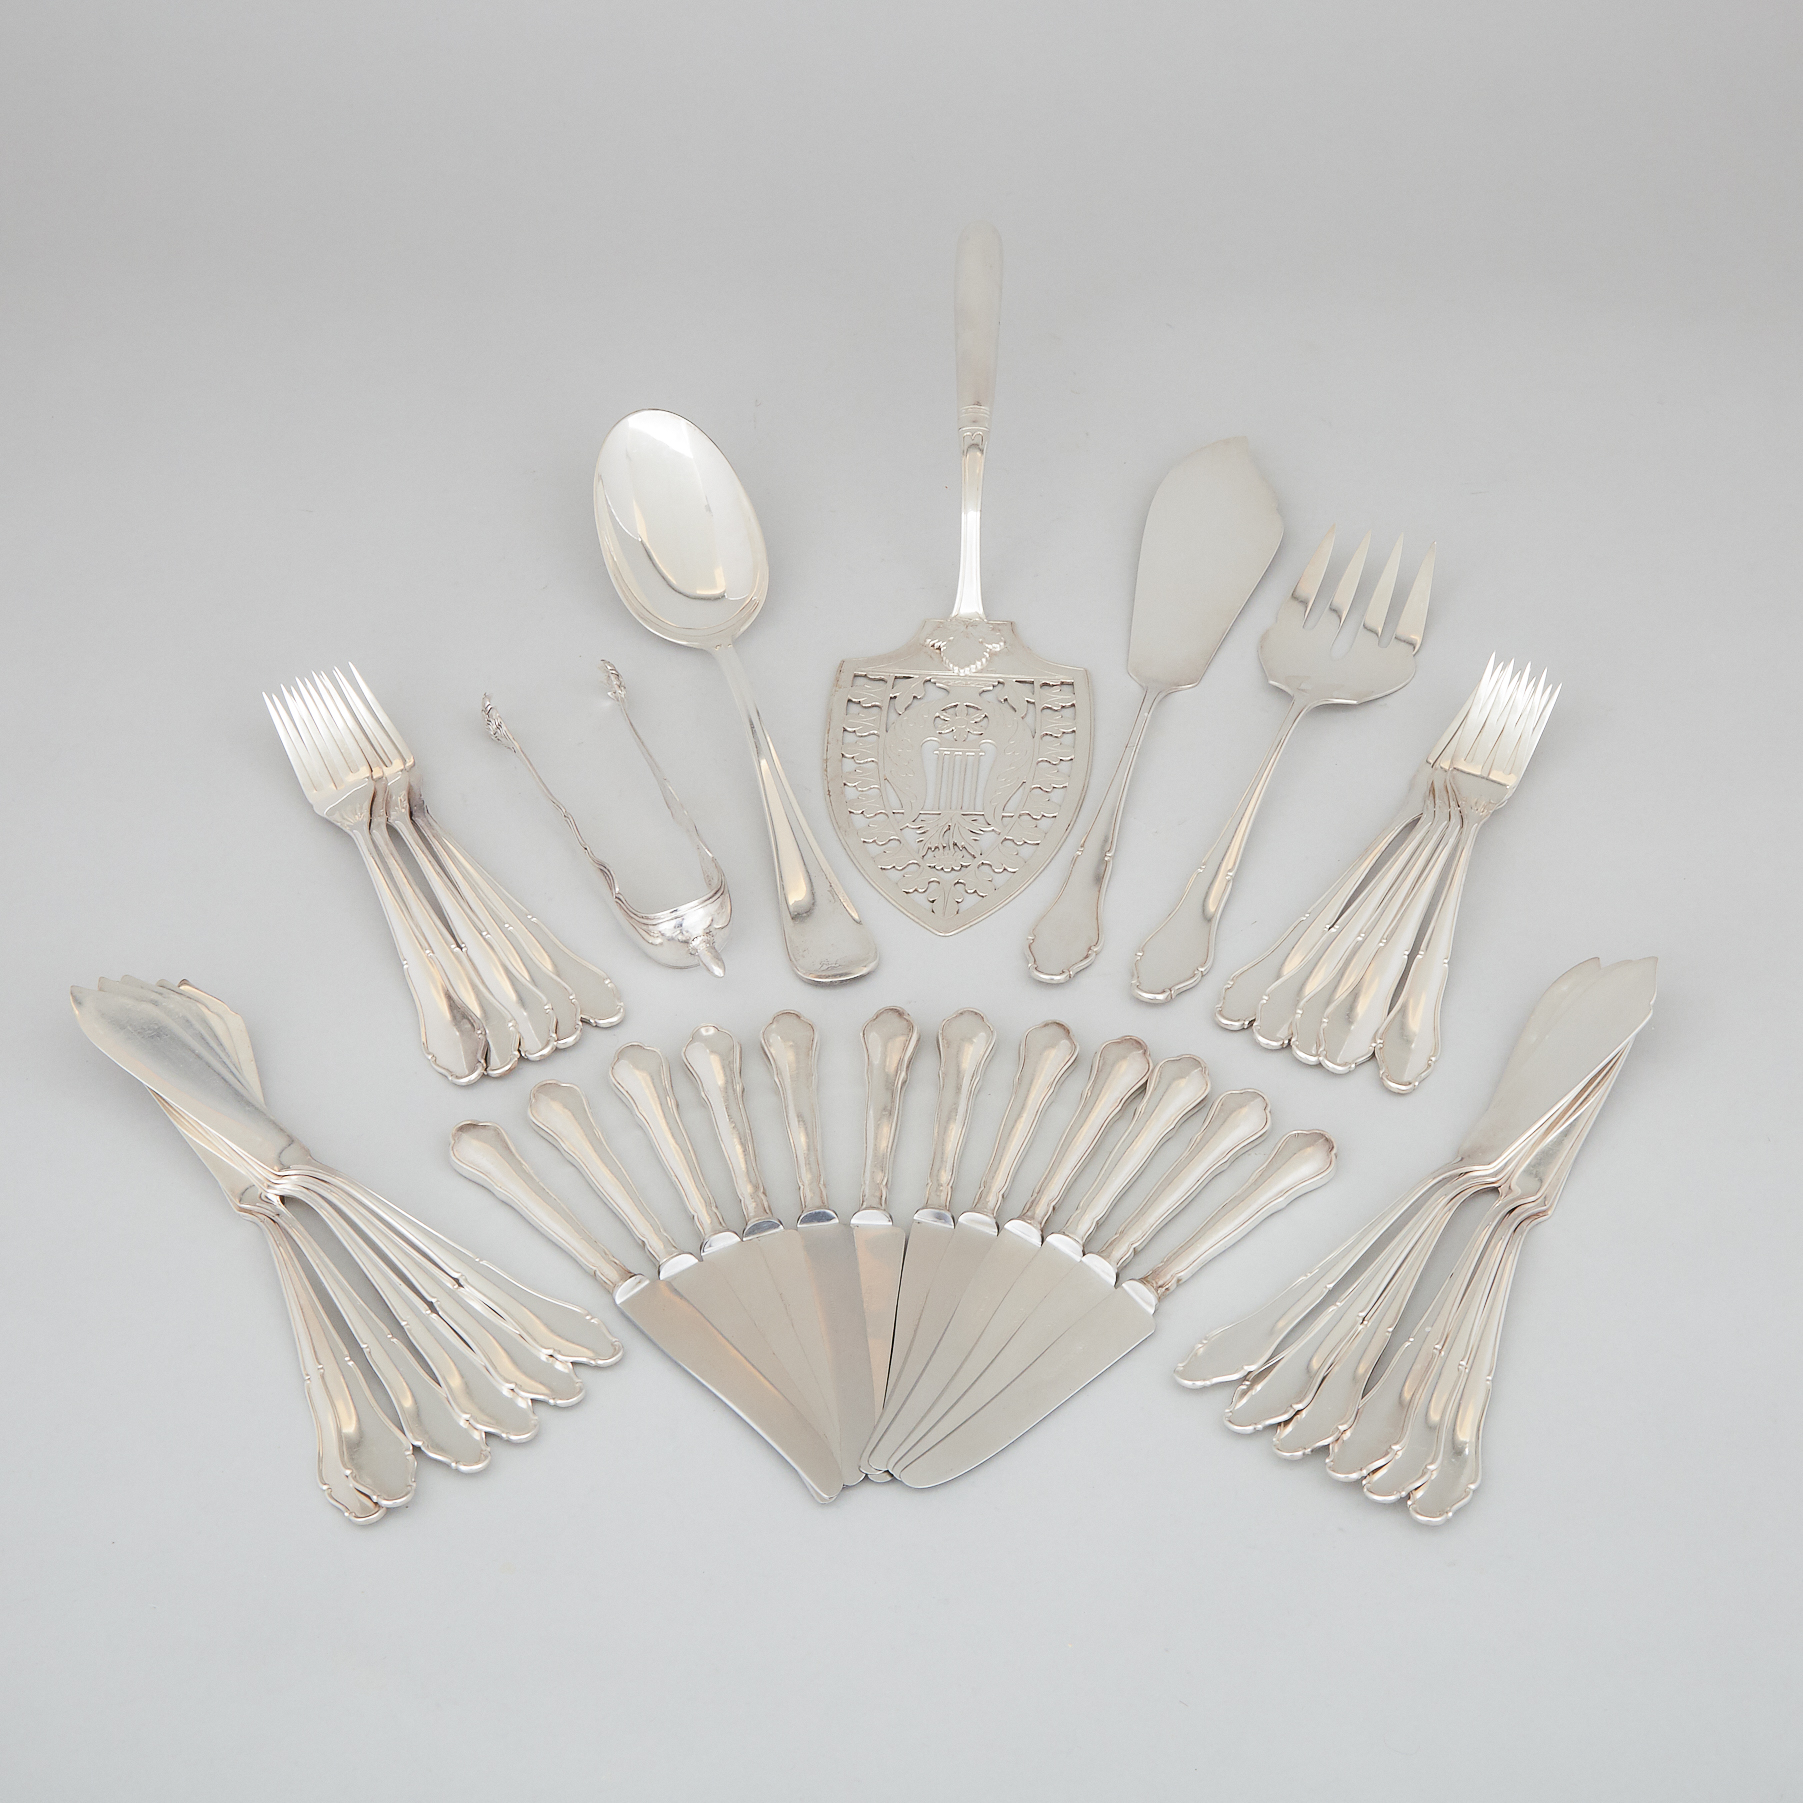 Group of Continental Silver Flatware, 19th/20th century